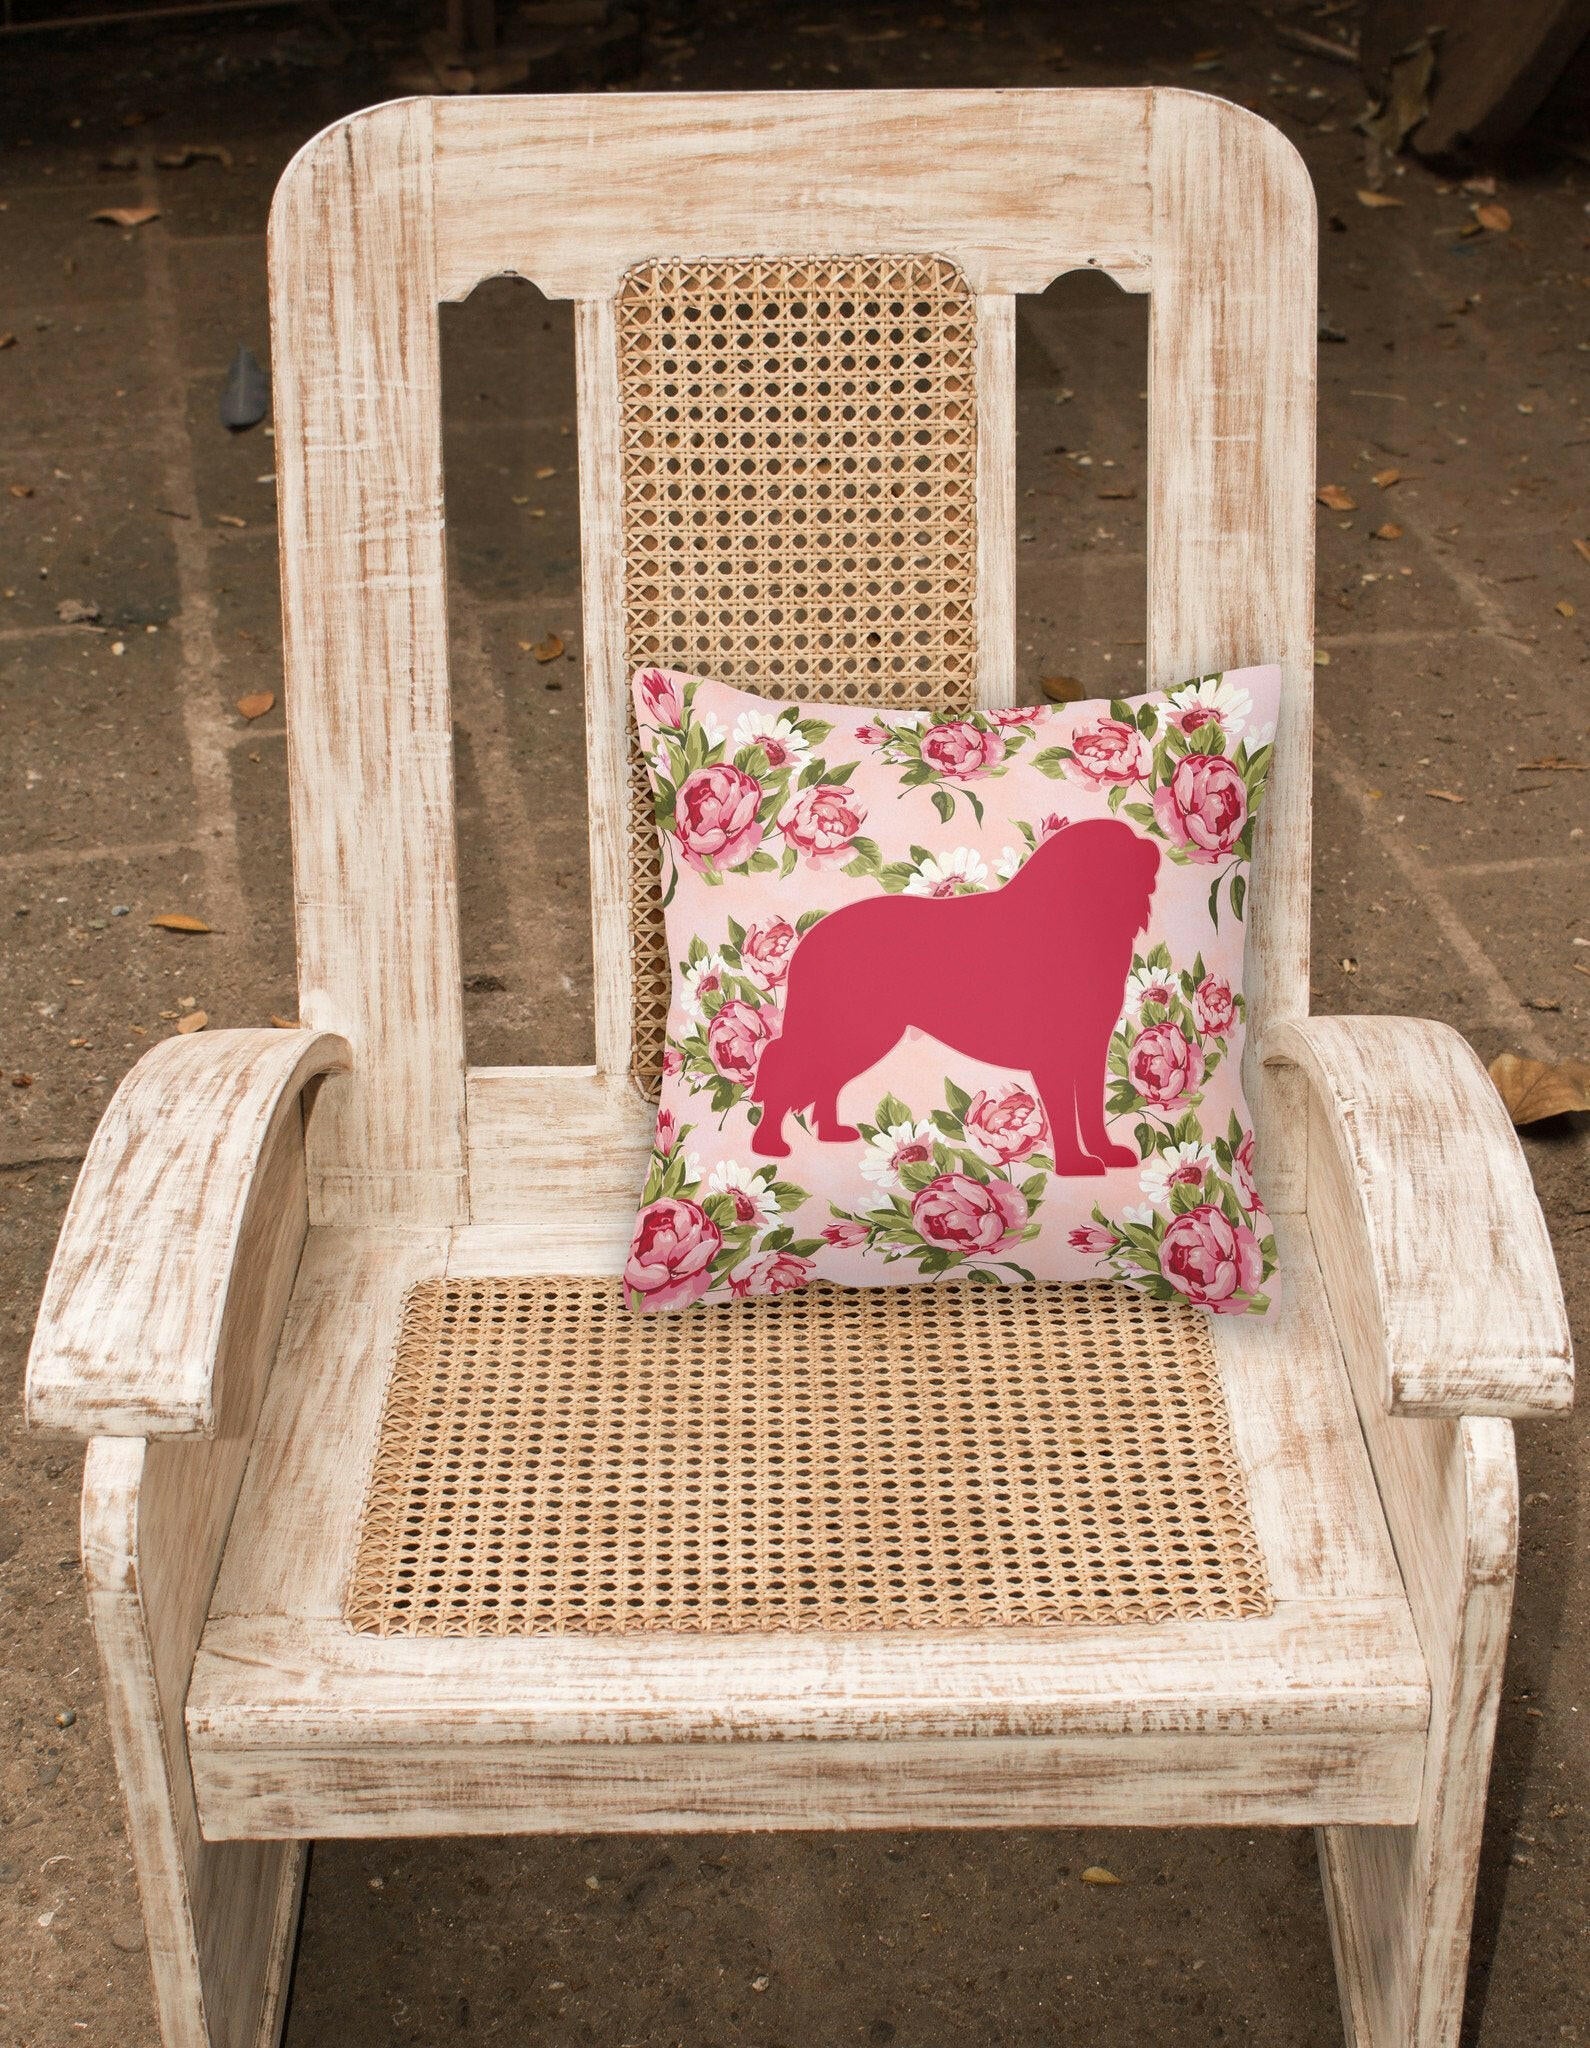 Tibetial Mastiff Shabby Chic Pink Roses  Fabric Decorative Pillow BB1077-RS-PK-PW1414 - the-store.com